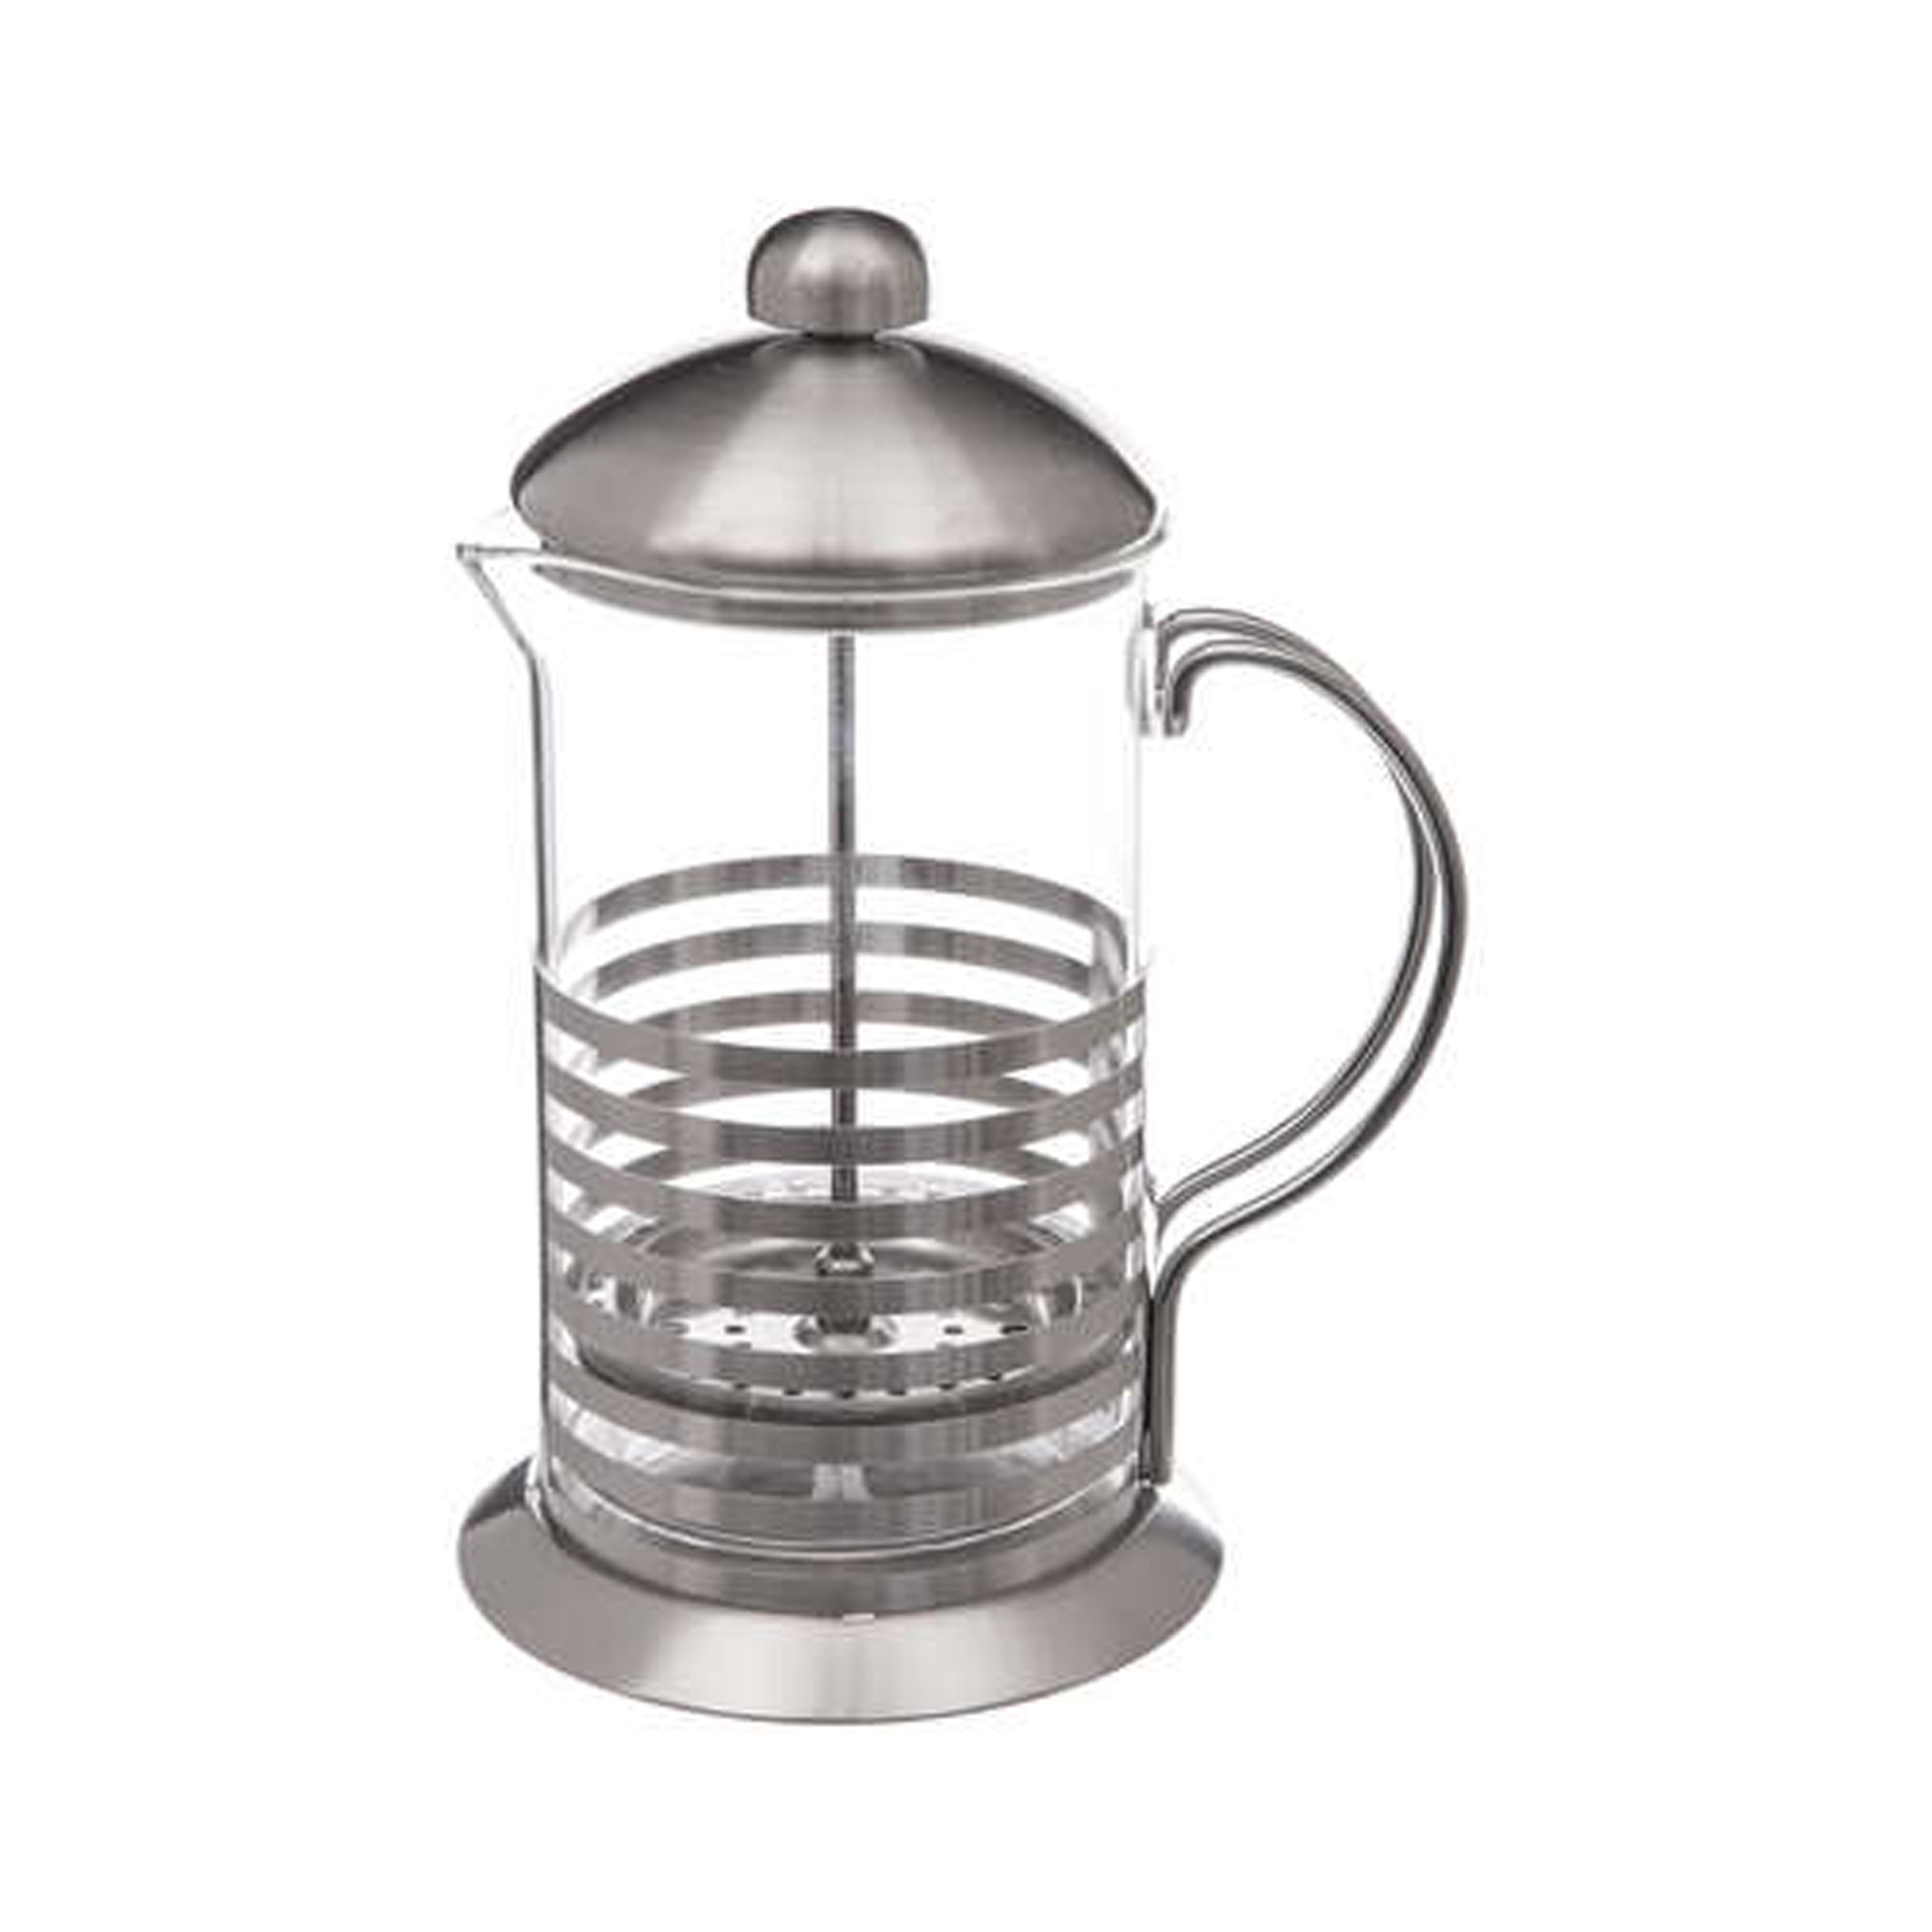 Cafetiere French Press koffiezetter koffiemaker pers 800 ml glas-rvs